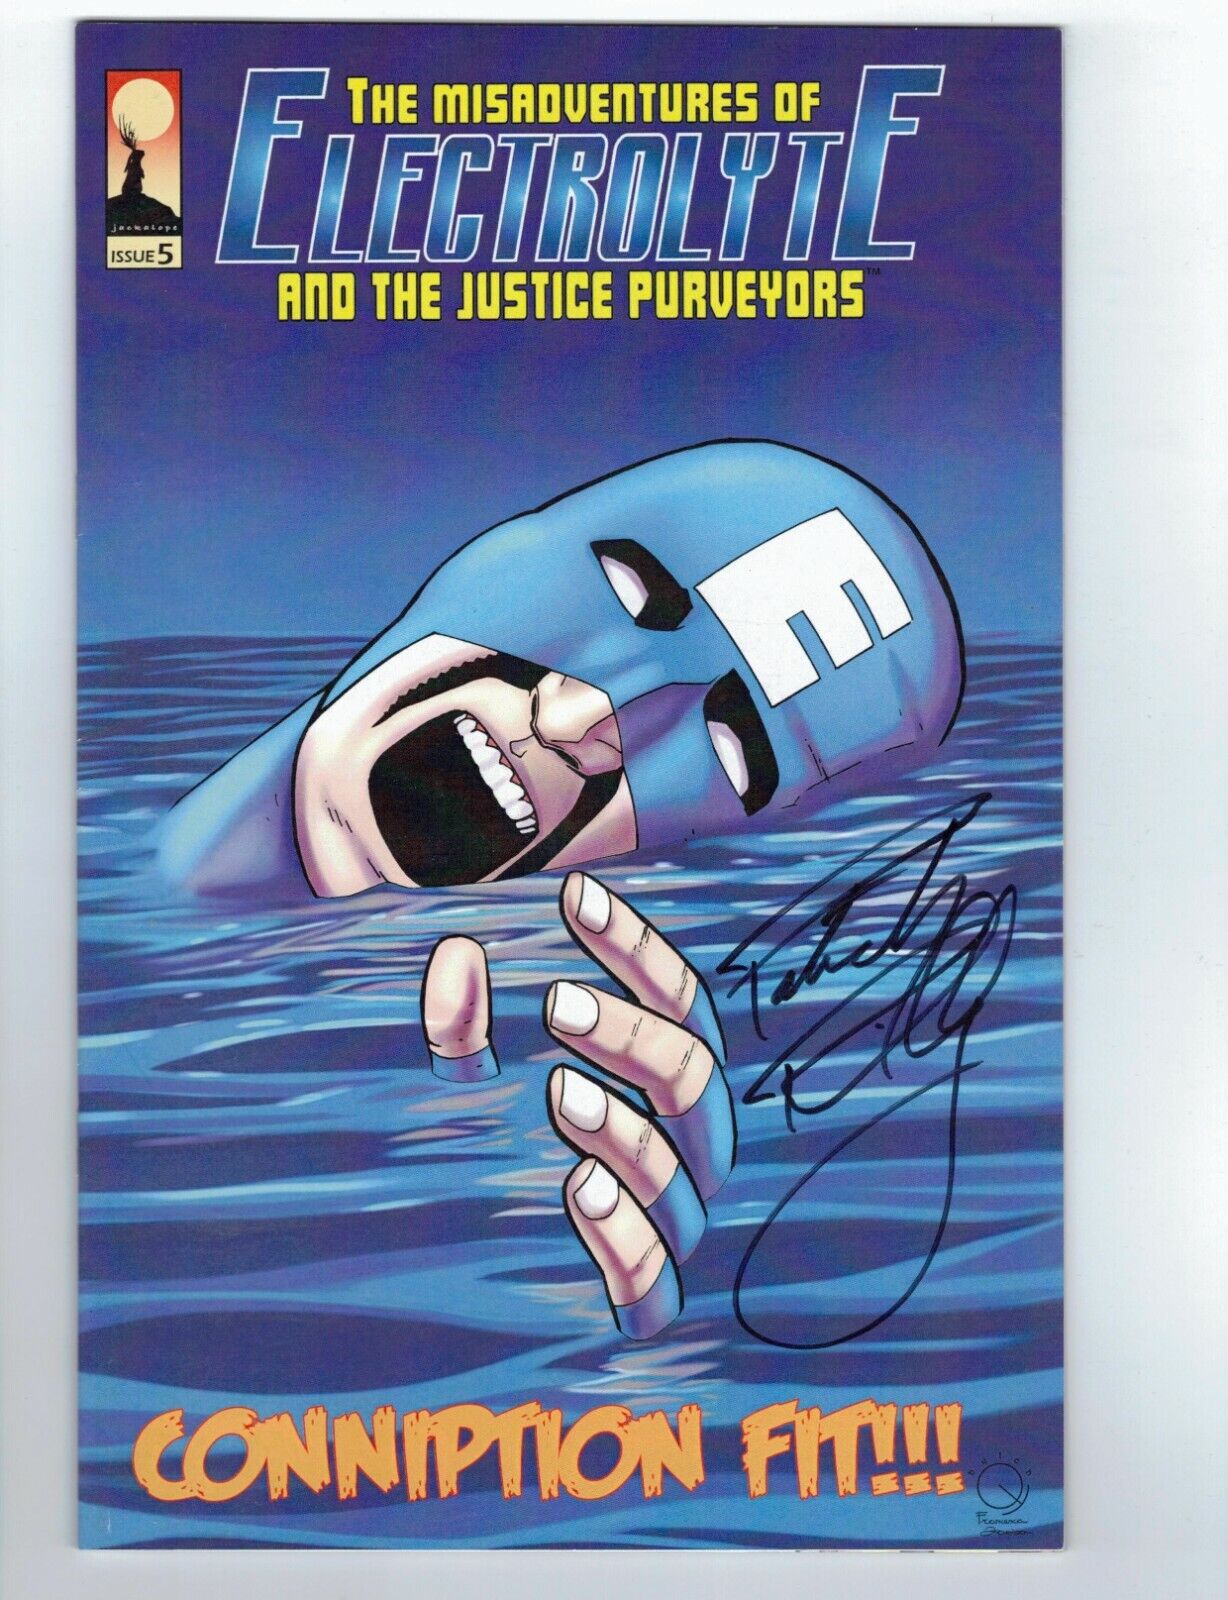 the Misadventures of Electrolyte and the Justice Purveyors #5 VF/NM signed comic